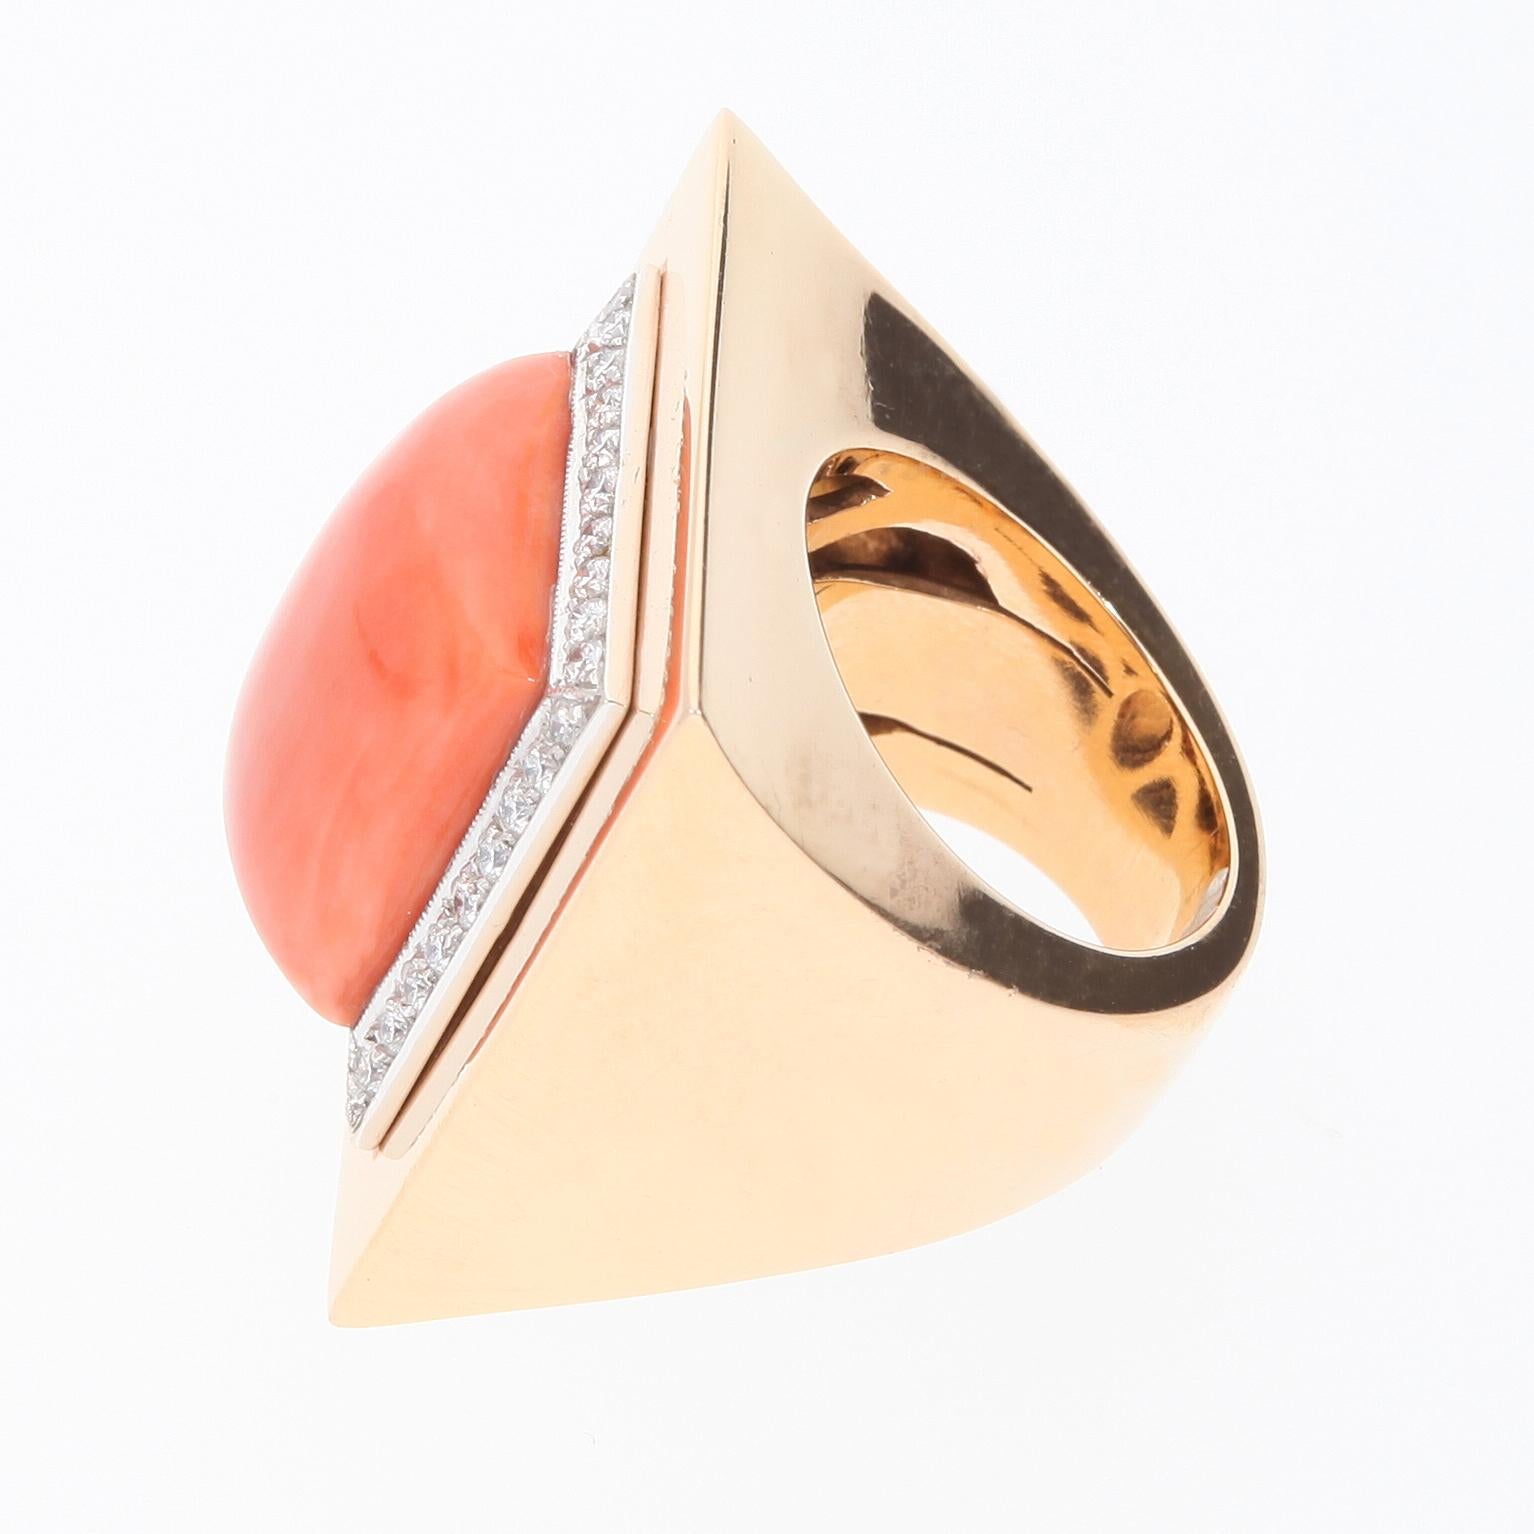 Salmon Coral Ring Surrounded by 36 Diamonds. 18 Kt Rose Gold. Handmade in Italy. For Sale 6